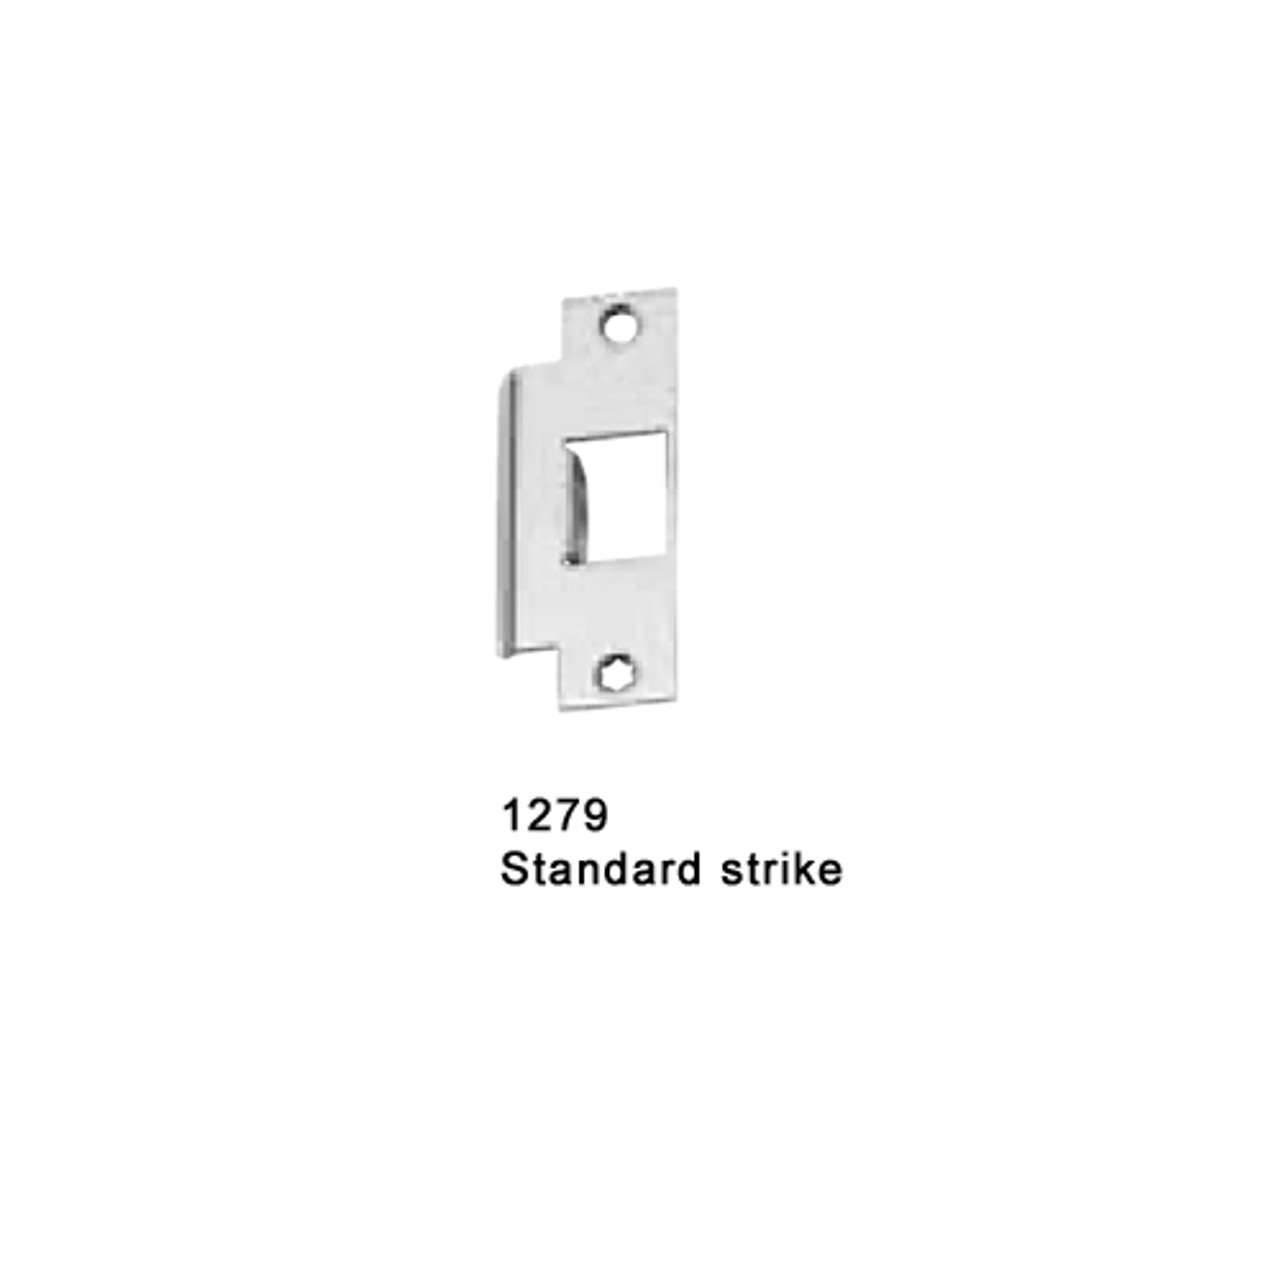 F-25-M-TP-US28-4-RHR Falcon 25 Series Fire Rated Mortise Lock Devices with 512TP Thumbpiece Trim in Anodized Aluminum